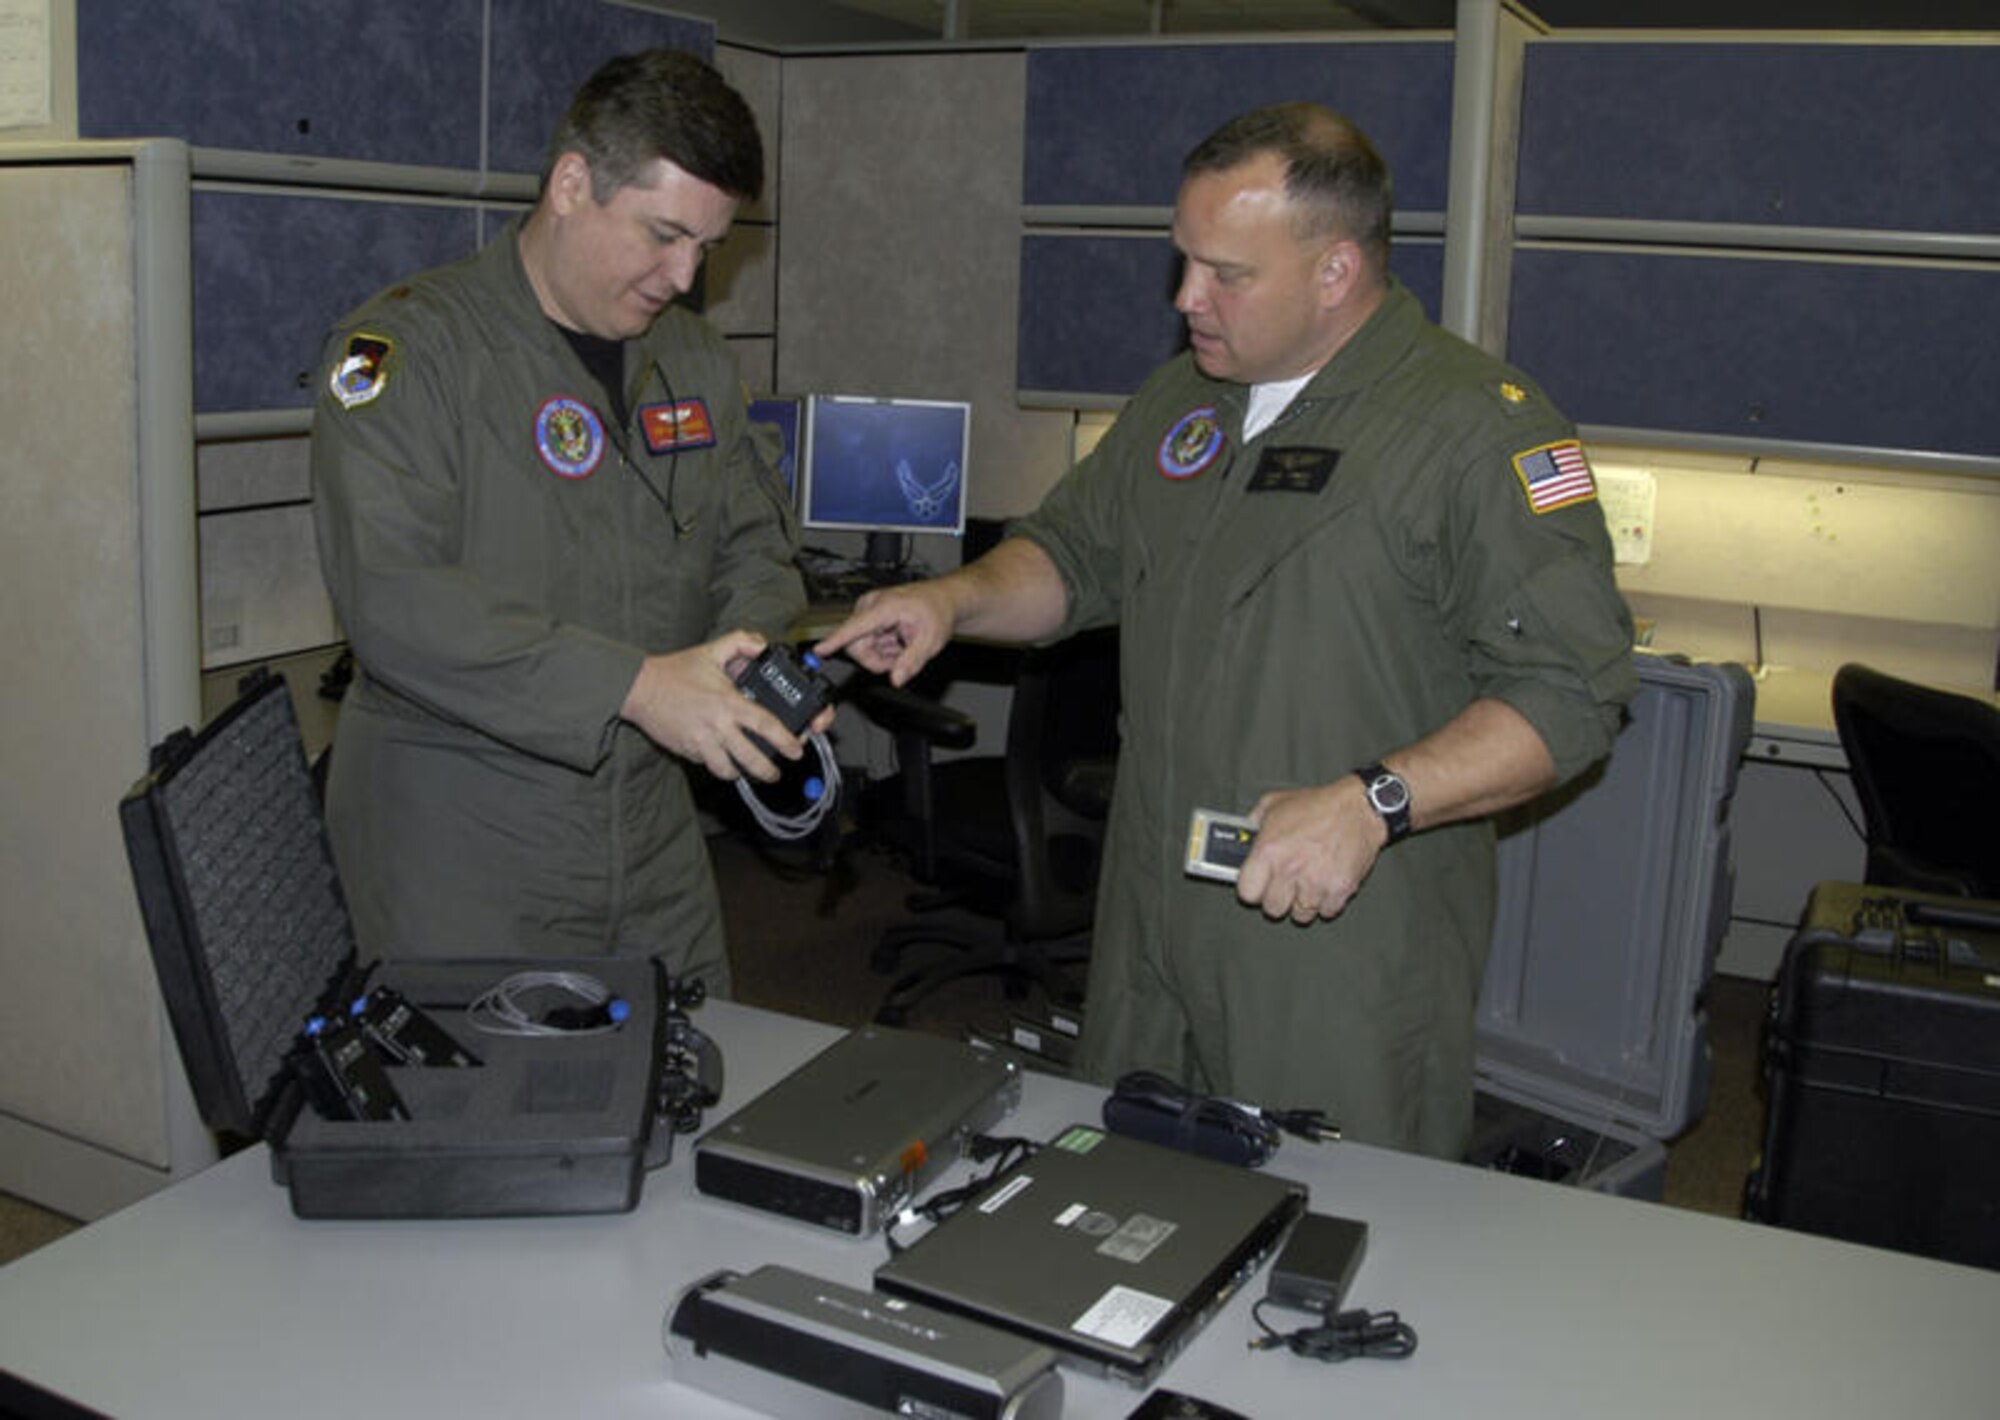 U.S. Air Force Maj. Jim Gallagher (left) and Navy Lt. Cmdr. Chris Arnett, examine Blue Force Tracking devices in preparation for Lt. Cmdr. Arnett's deployment in support of Haitian earthquake relief efforts. U.S. Air Force photo by Master Sgt. Jerry Harlan